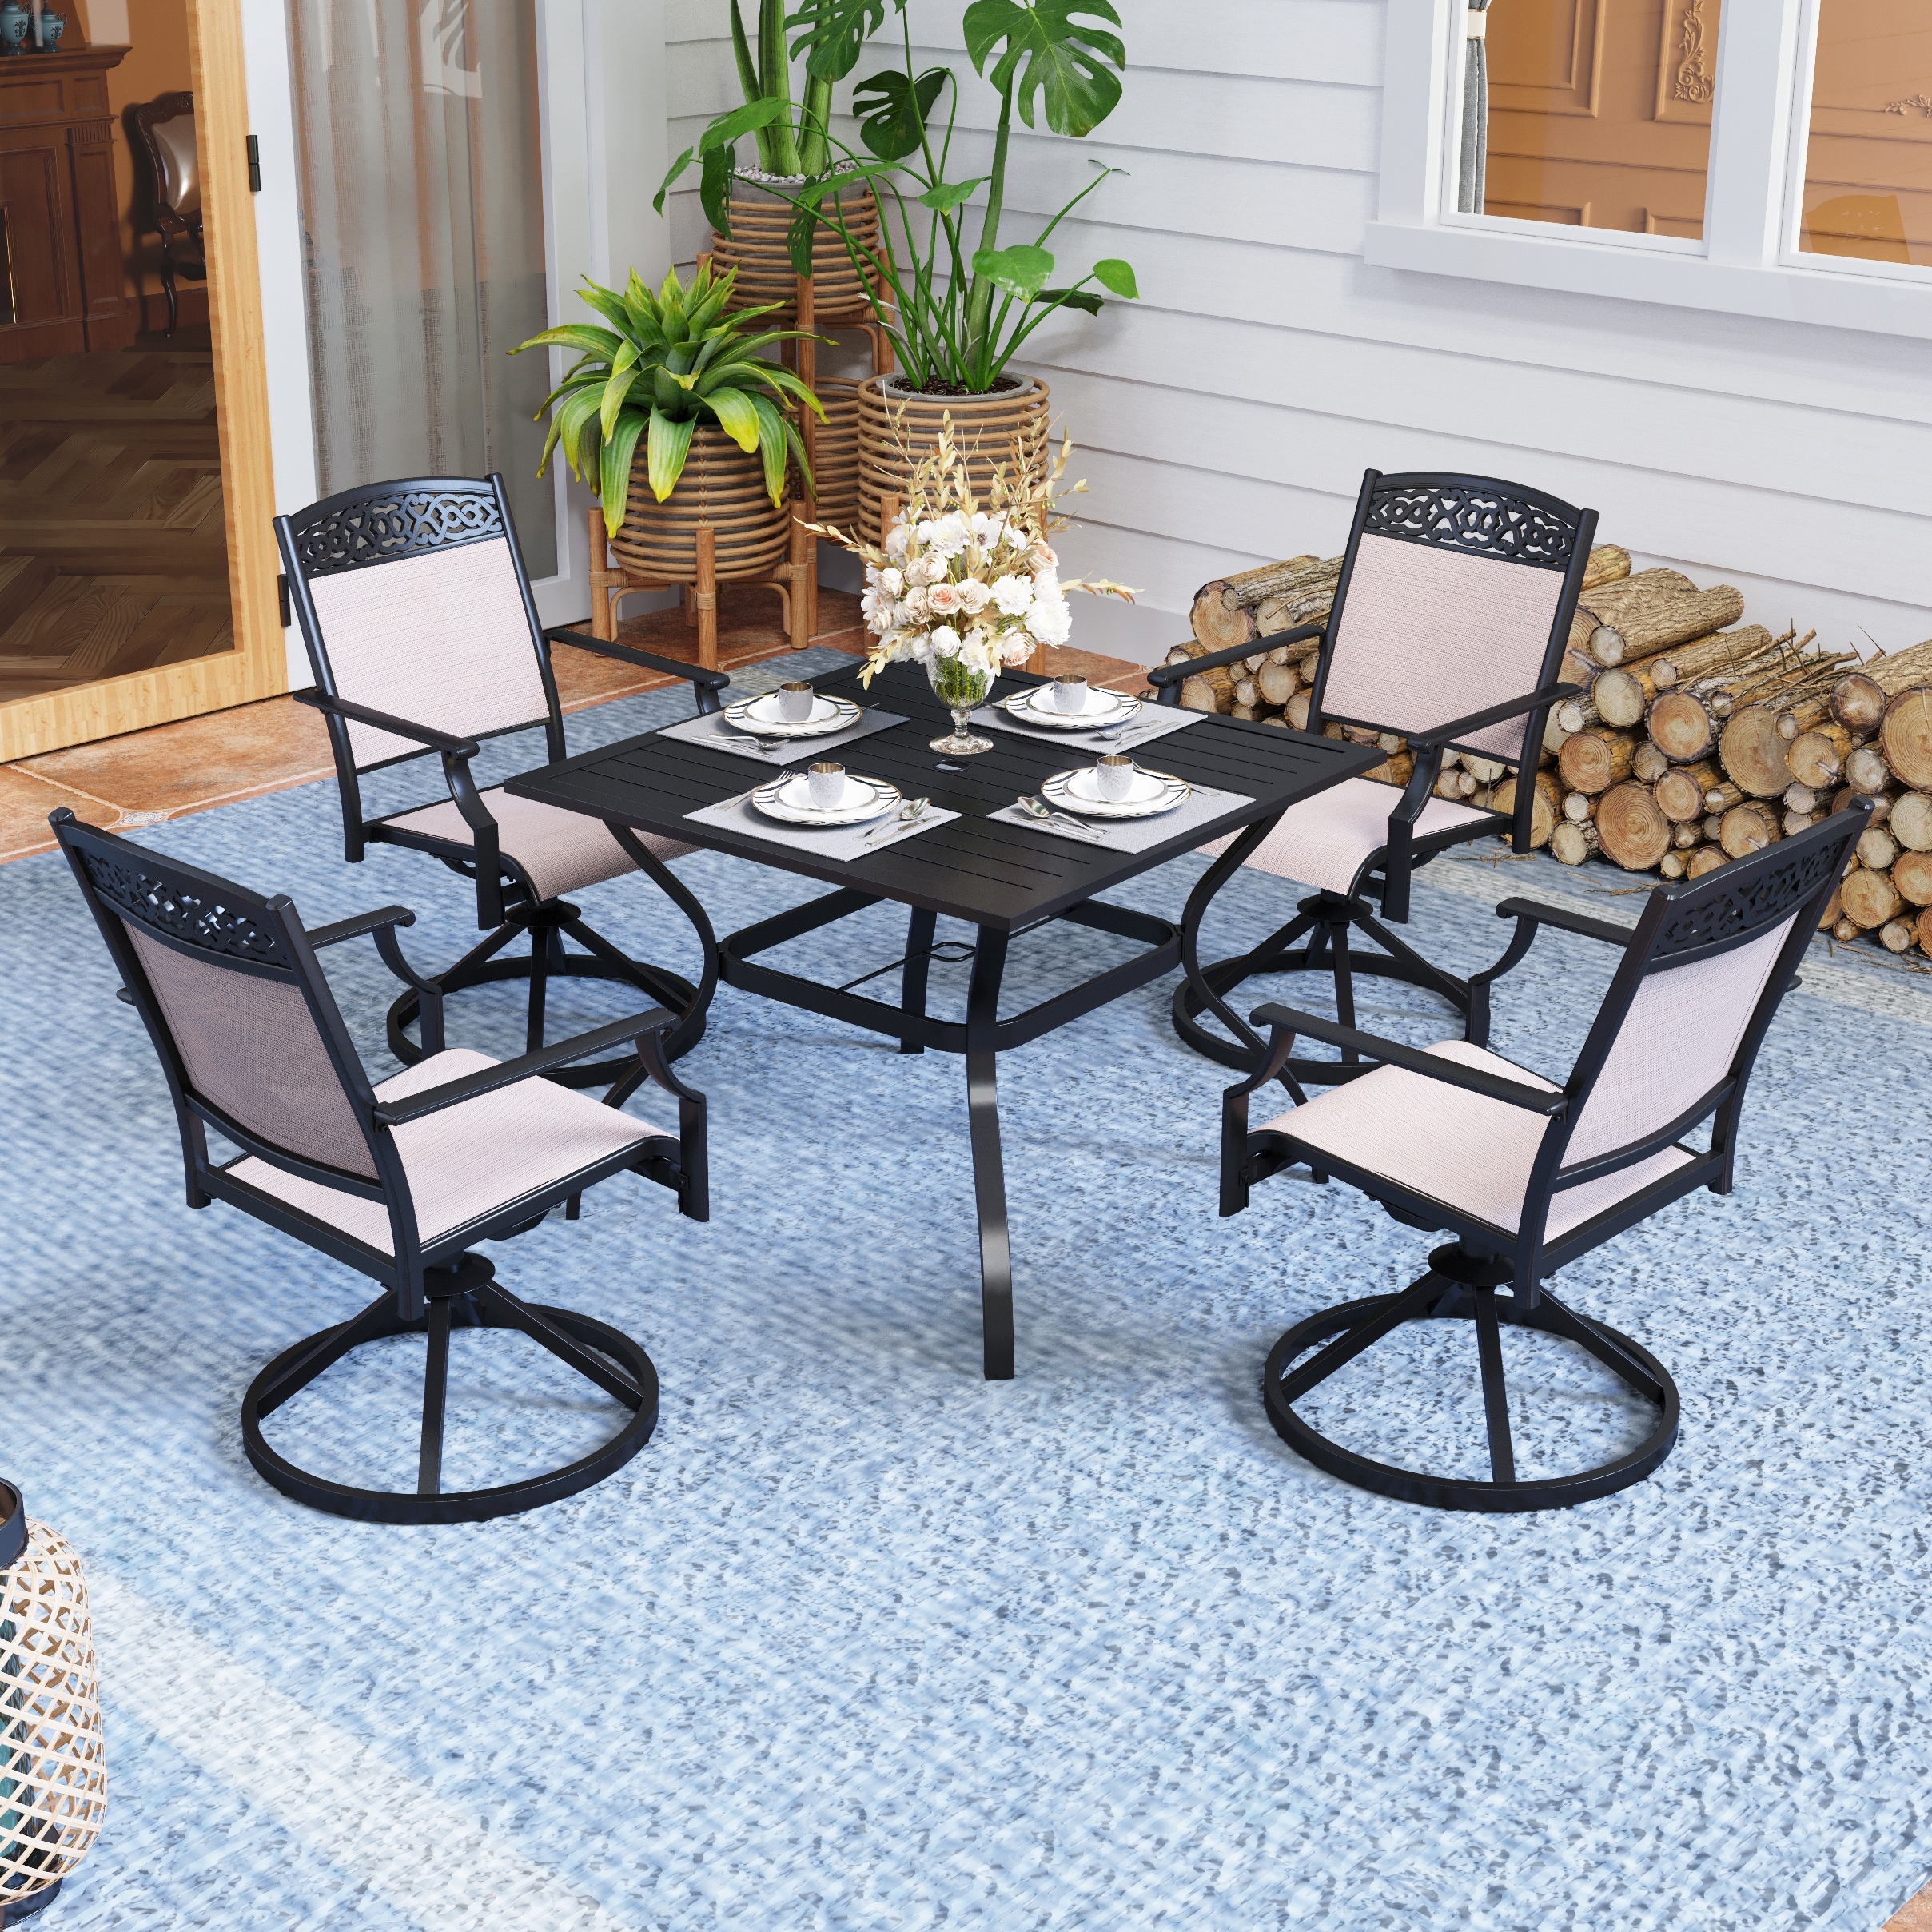 Phi Villa 5/7-Piece Cast Aluminum Patio Dining Set wtih Stackle or Swivel Chairs and 1 Metal Table 4StackableChair - image 3 of 5